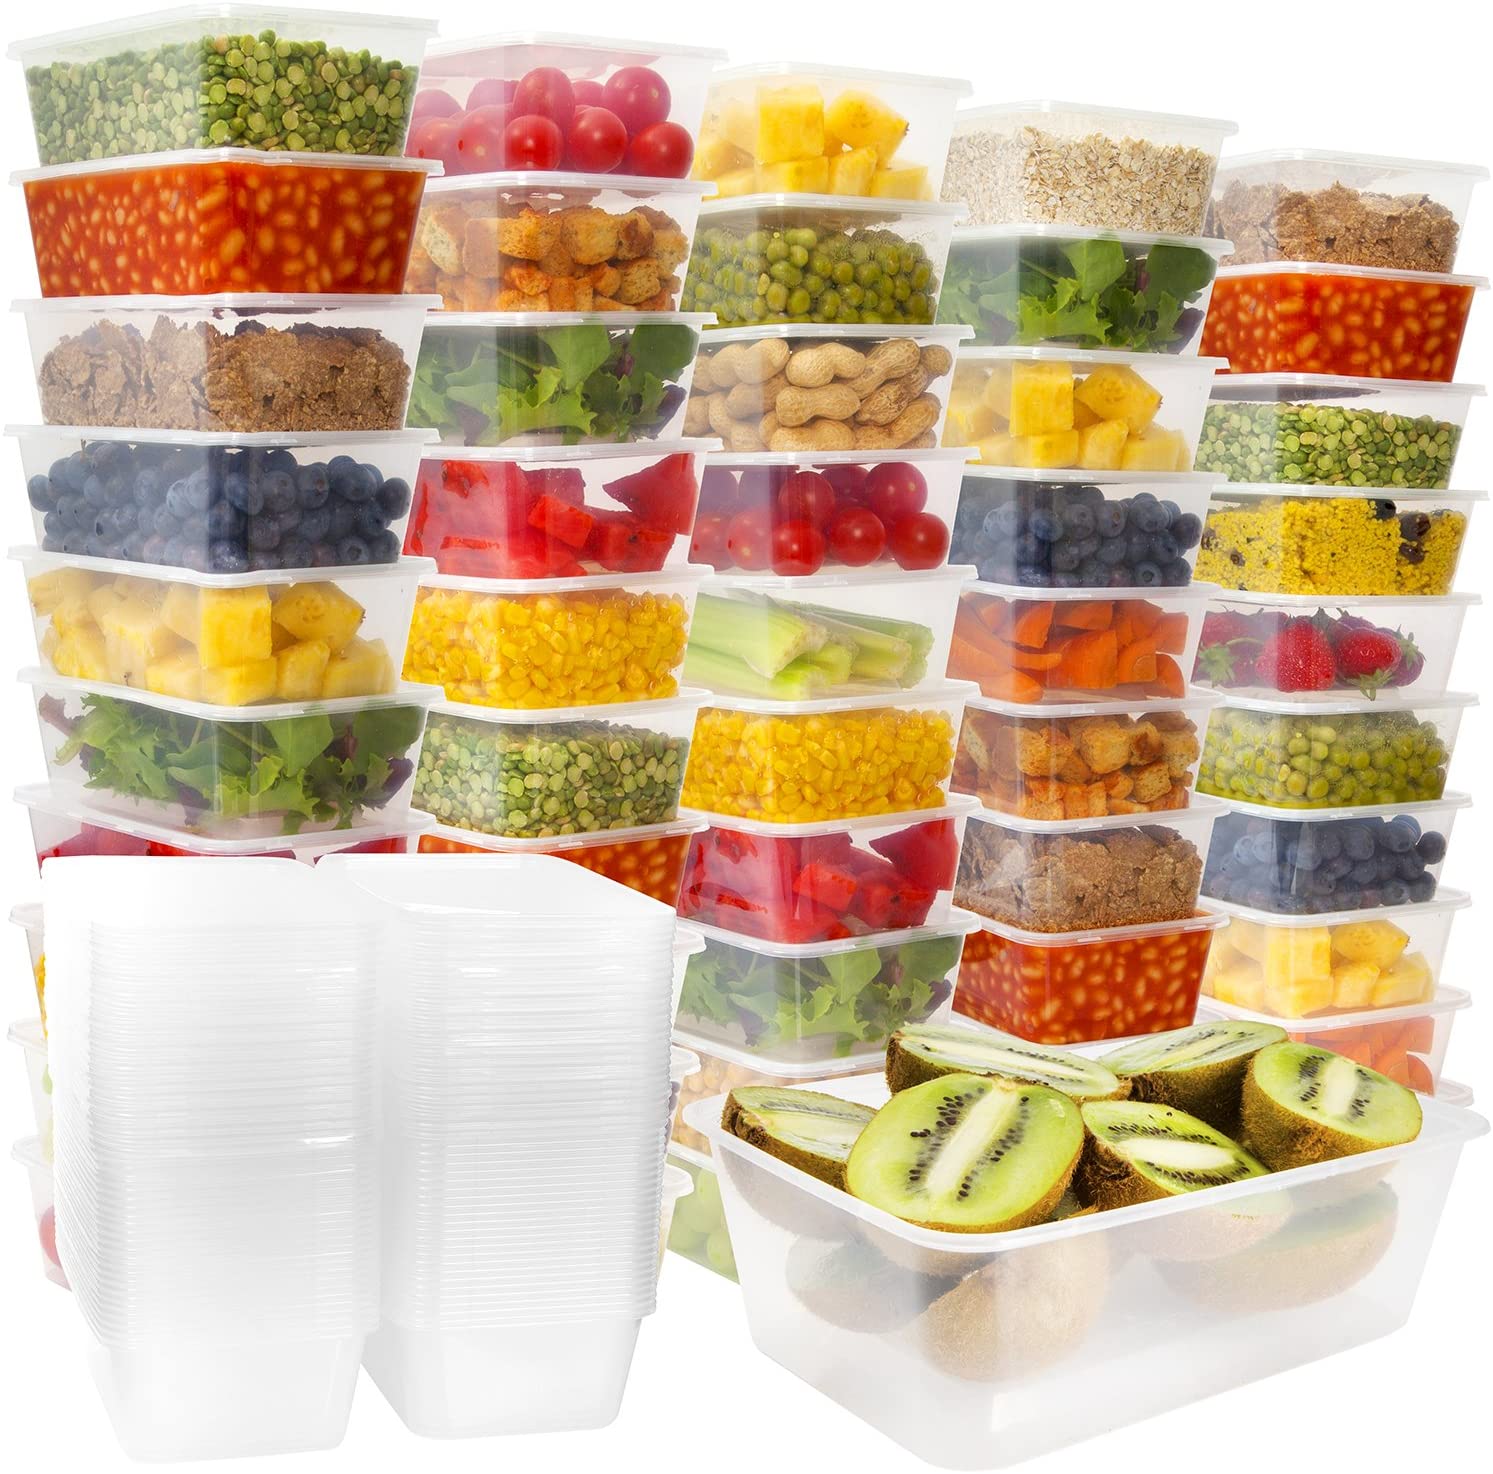 ns.productsocialmetatags:resources.openGraphTitle  Food storage containers,  Plastic container storage, Storage containers